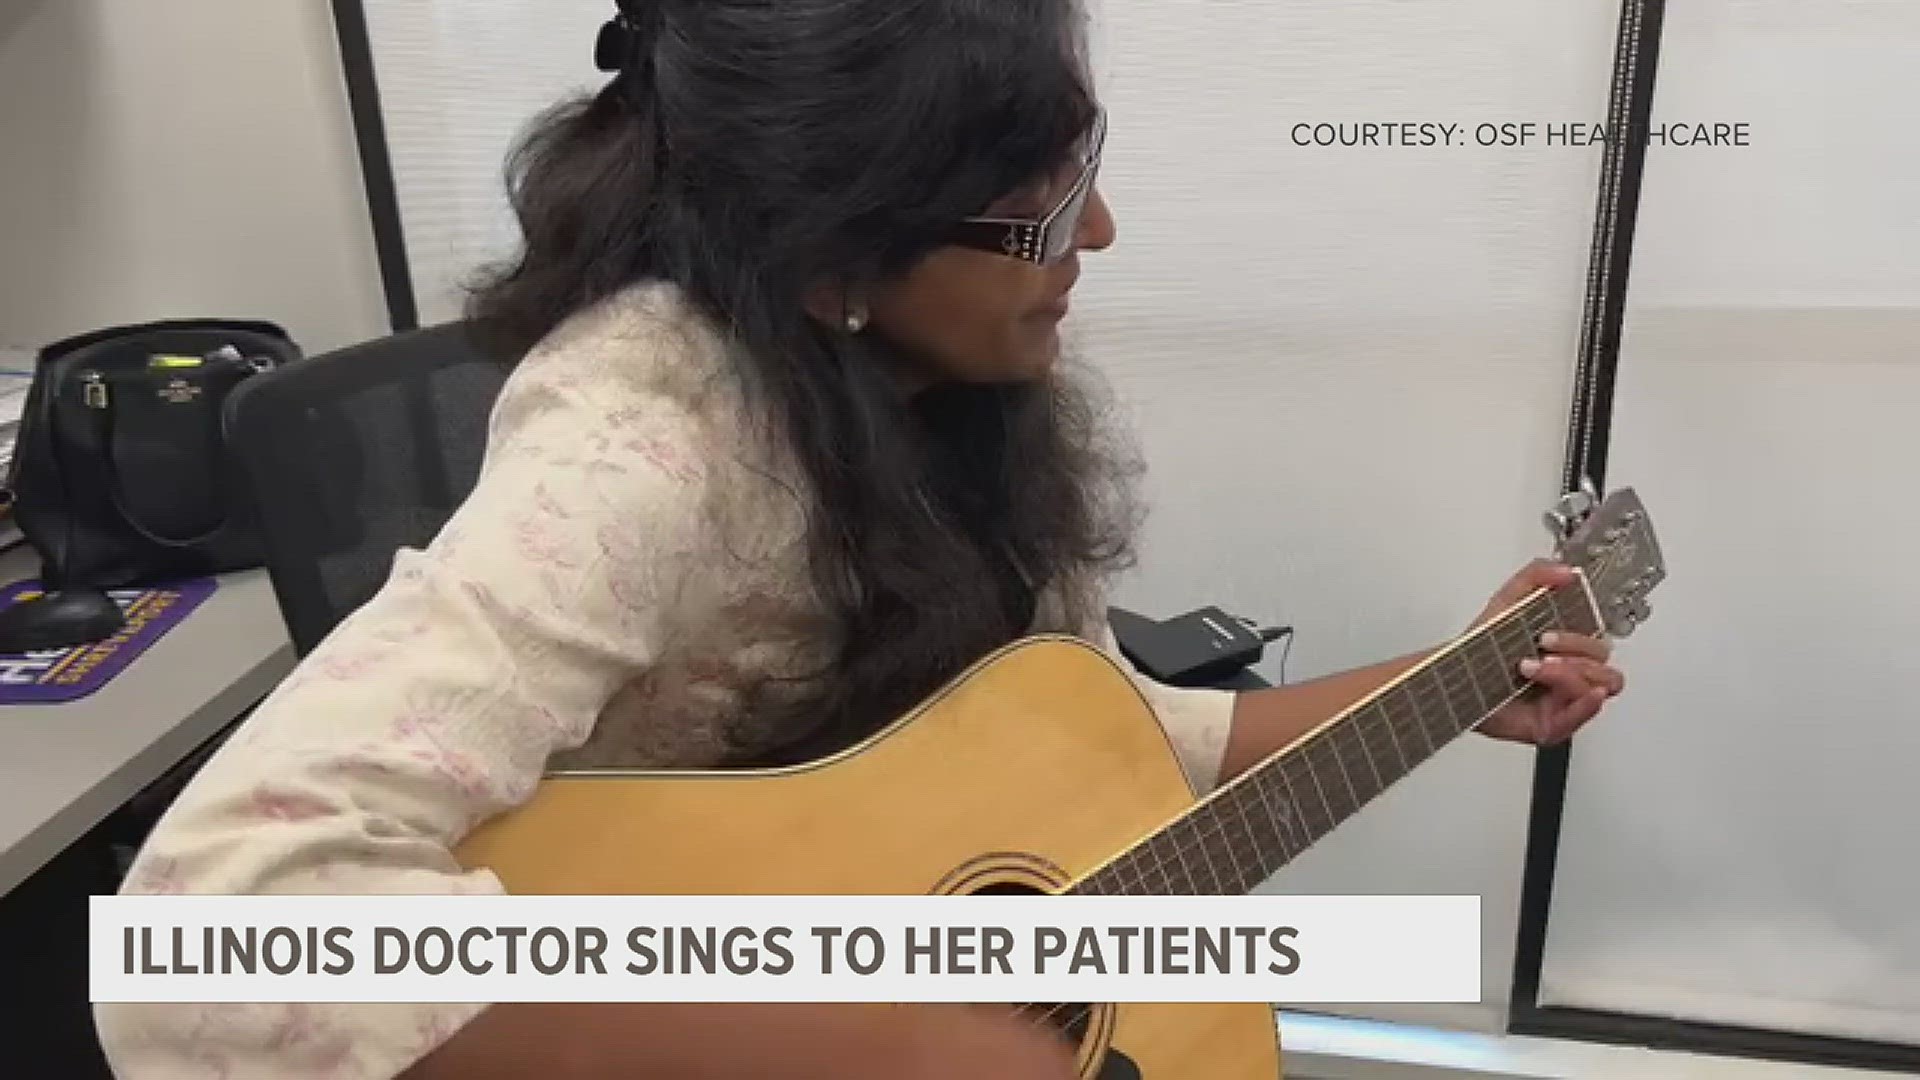 For years now, Dr. Alina Paul has sung to her patients. She says many of her patients love it, and it's something she says is backed by medical research.